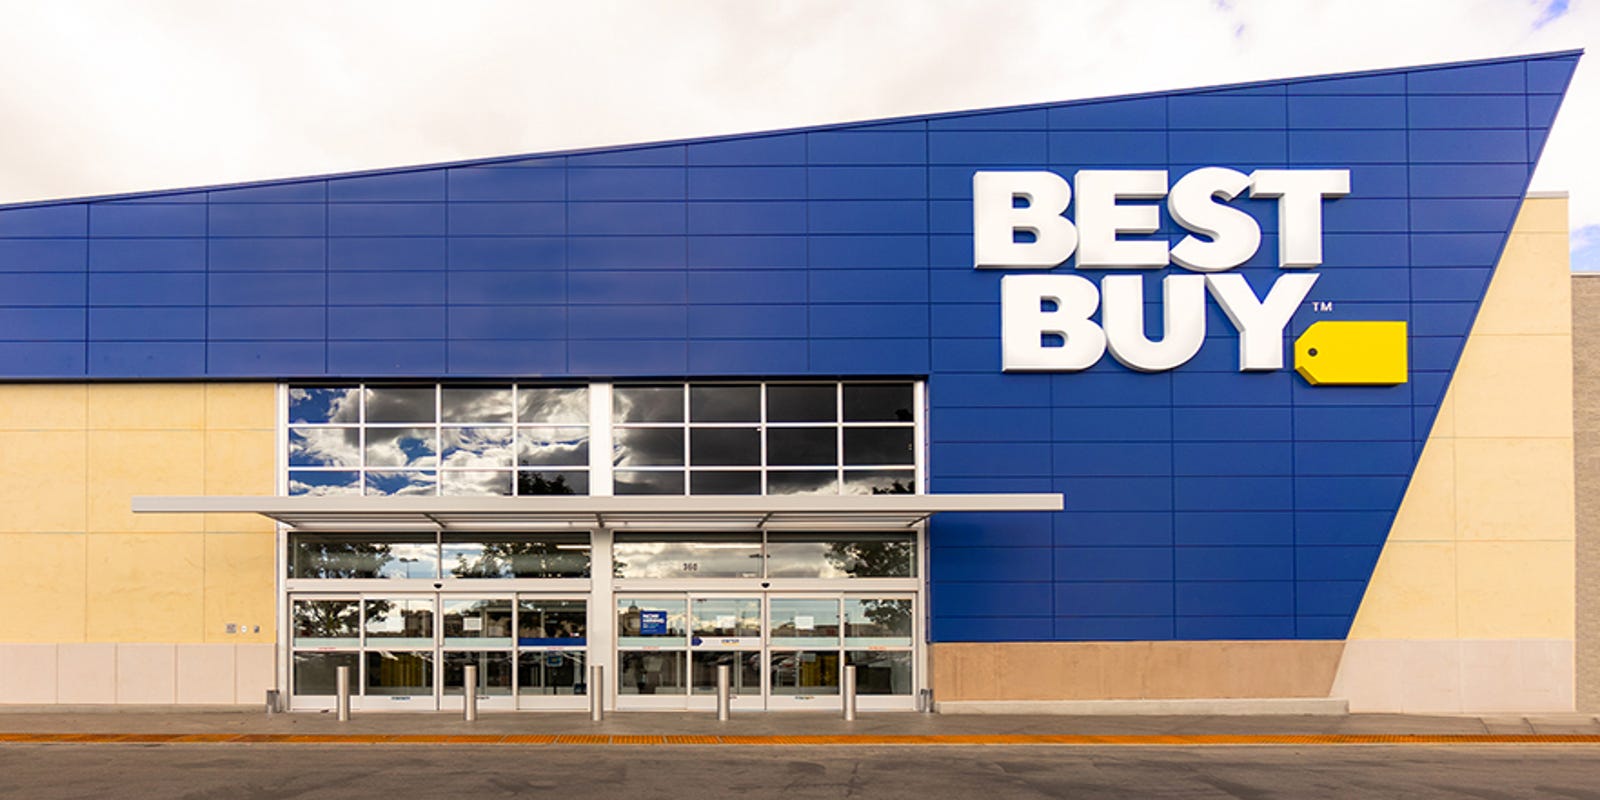 Black Friday 2018: Best Buy will have huge discounts on TVs and other electronics1600 x 800